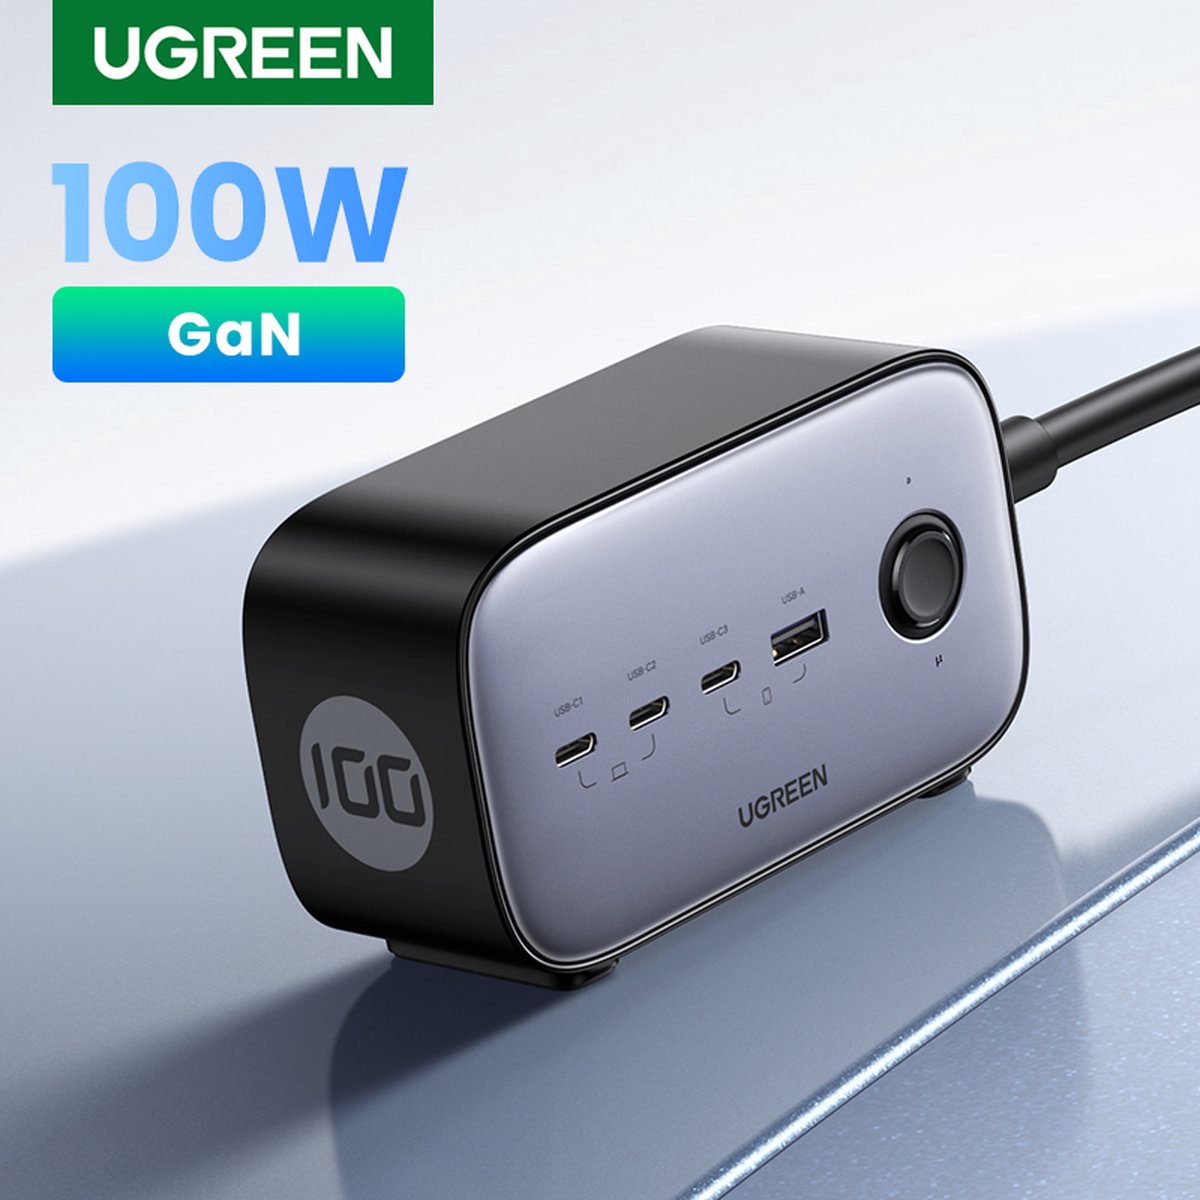 UGREEN DigiNest Pro 100W - Chargeur Rapide GaN - Chargeur